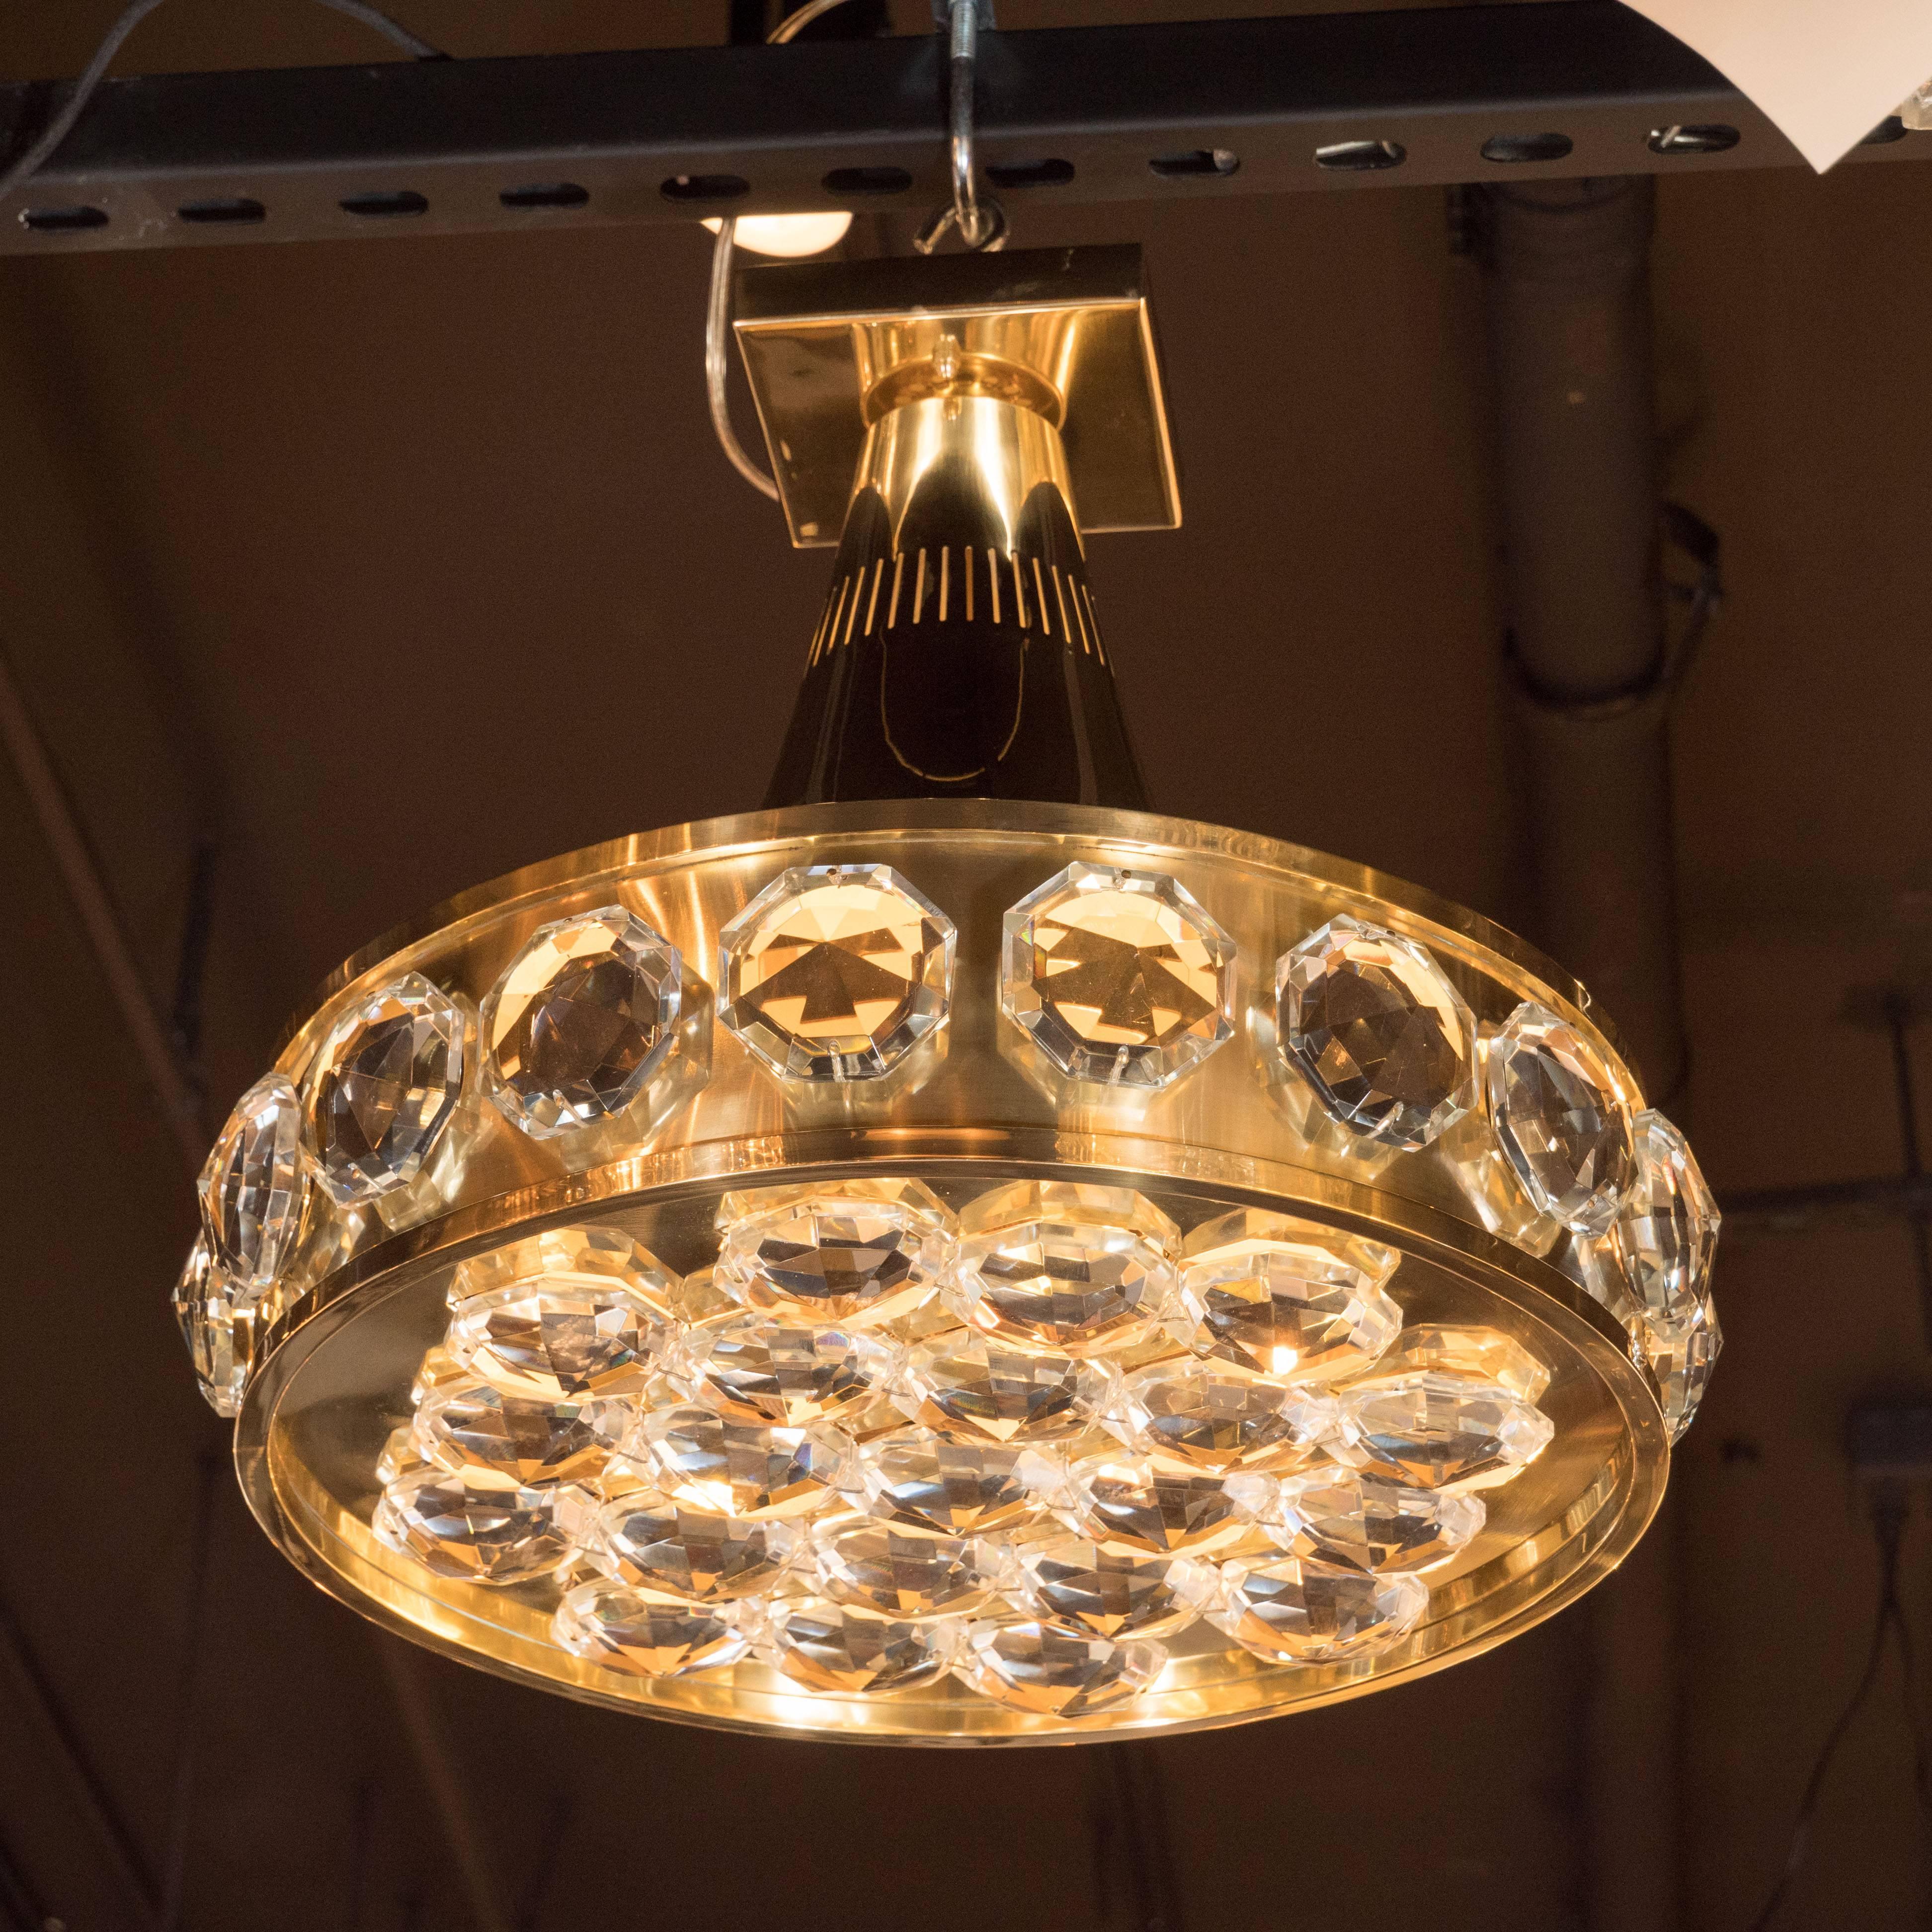 These glamorous Bakalowits & Sohne cut crystal and polished brass flush mount fixtures appear like a scattering of brilliantly illuminated diamonds in a gold setting. Additionally, there are vertical perforations circumscribing the top of the